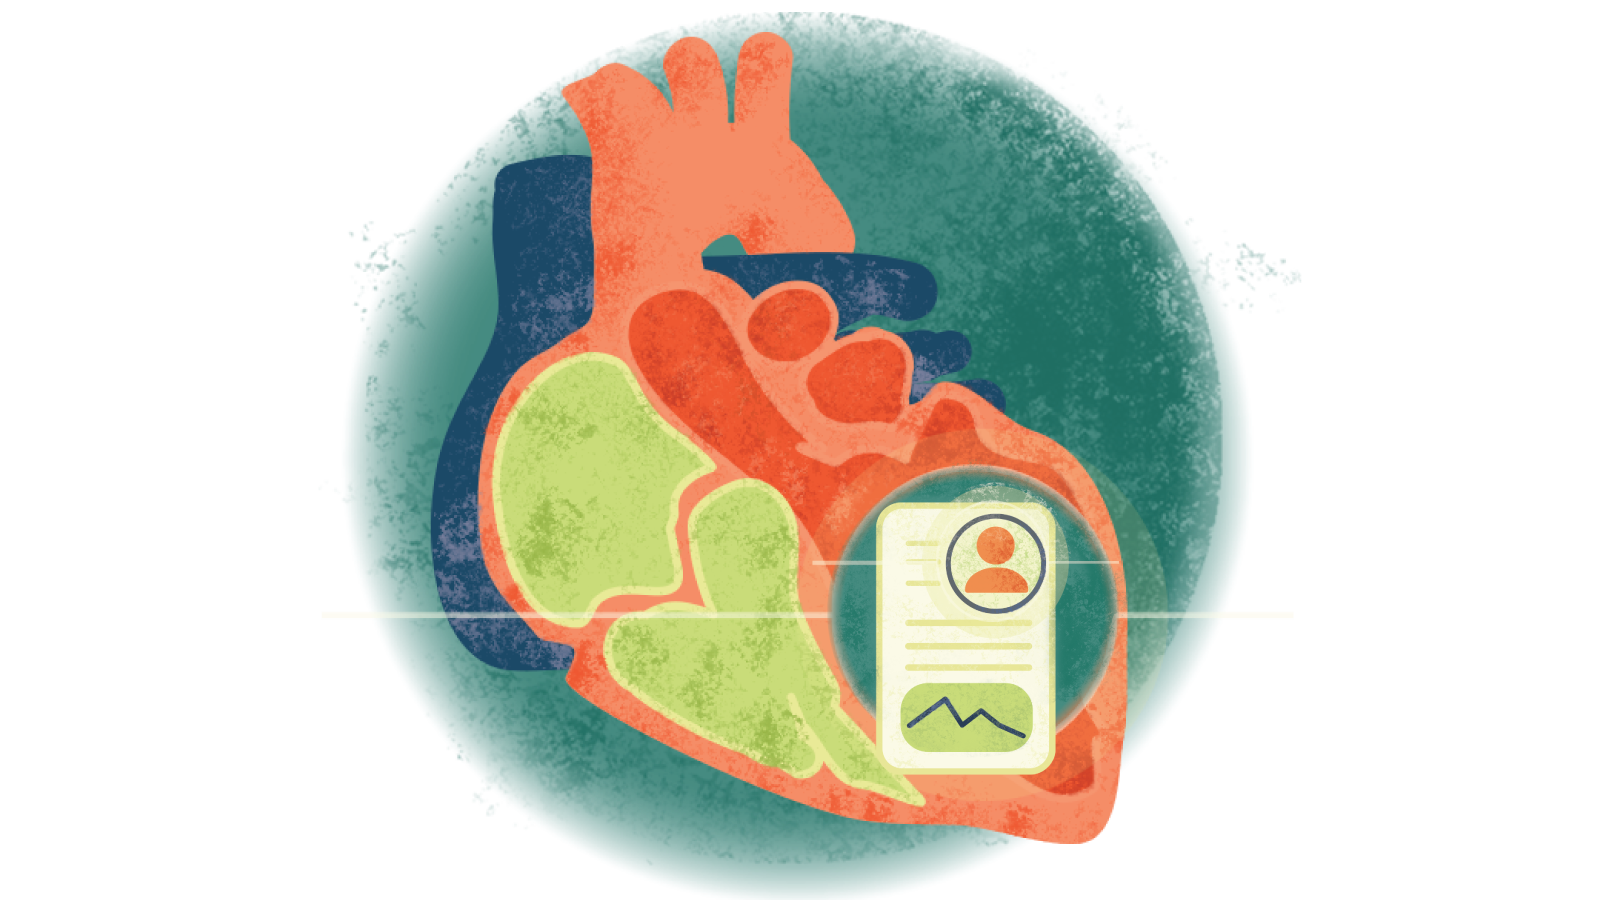 Illustration of a written case study over a heart with cardiomyopathy